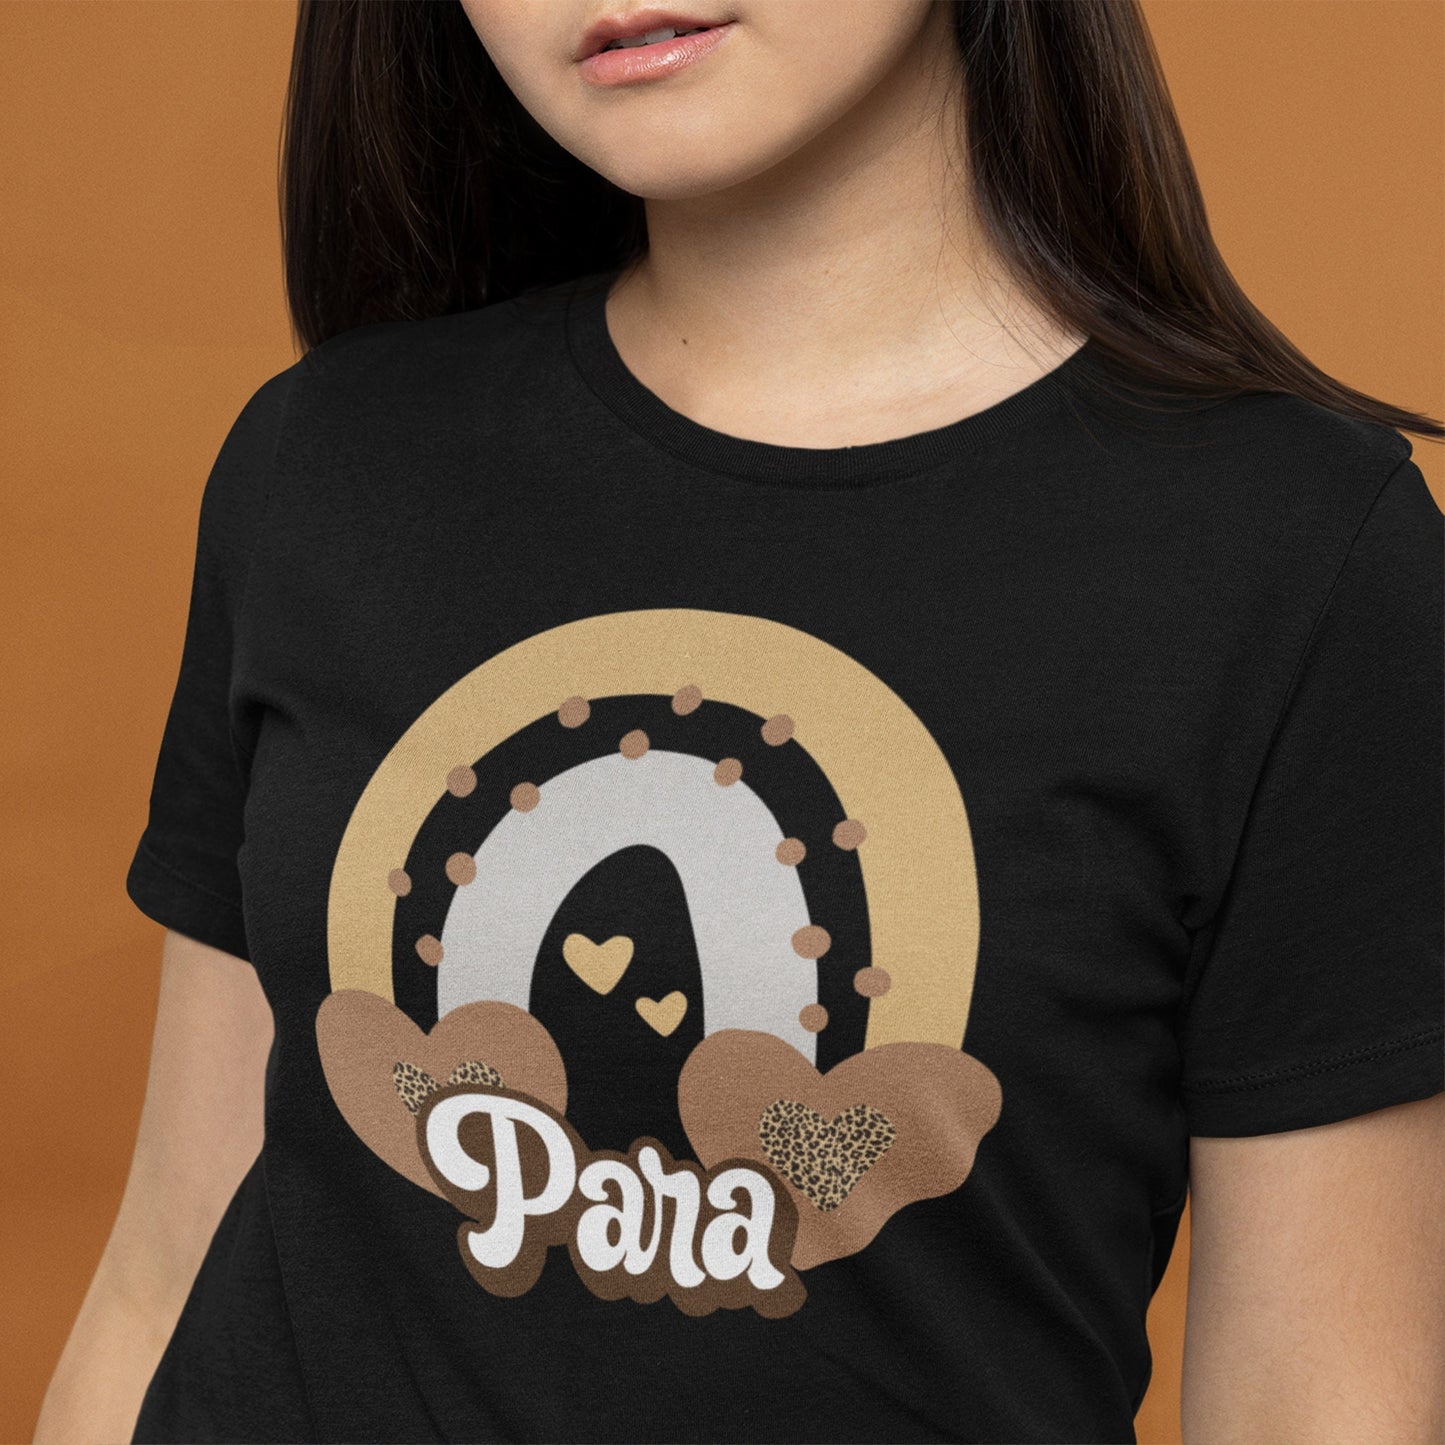 Para Shirt, Paraprofessional Gifts, Substitute Subs Teacher, Parapro Early Childhood Educator, Daycare Teacher Shirt, Paraprofessional Shirt